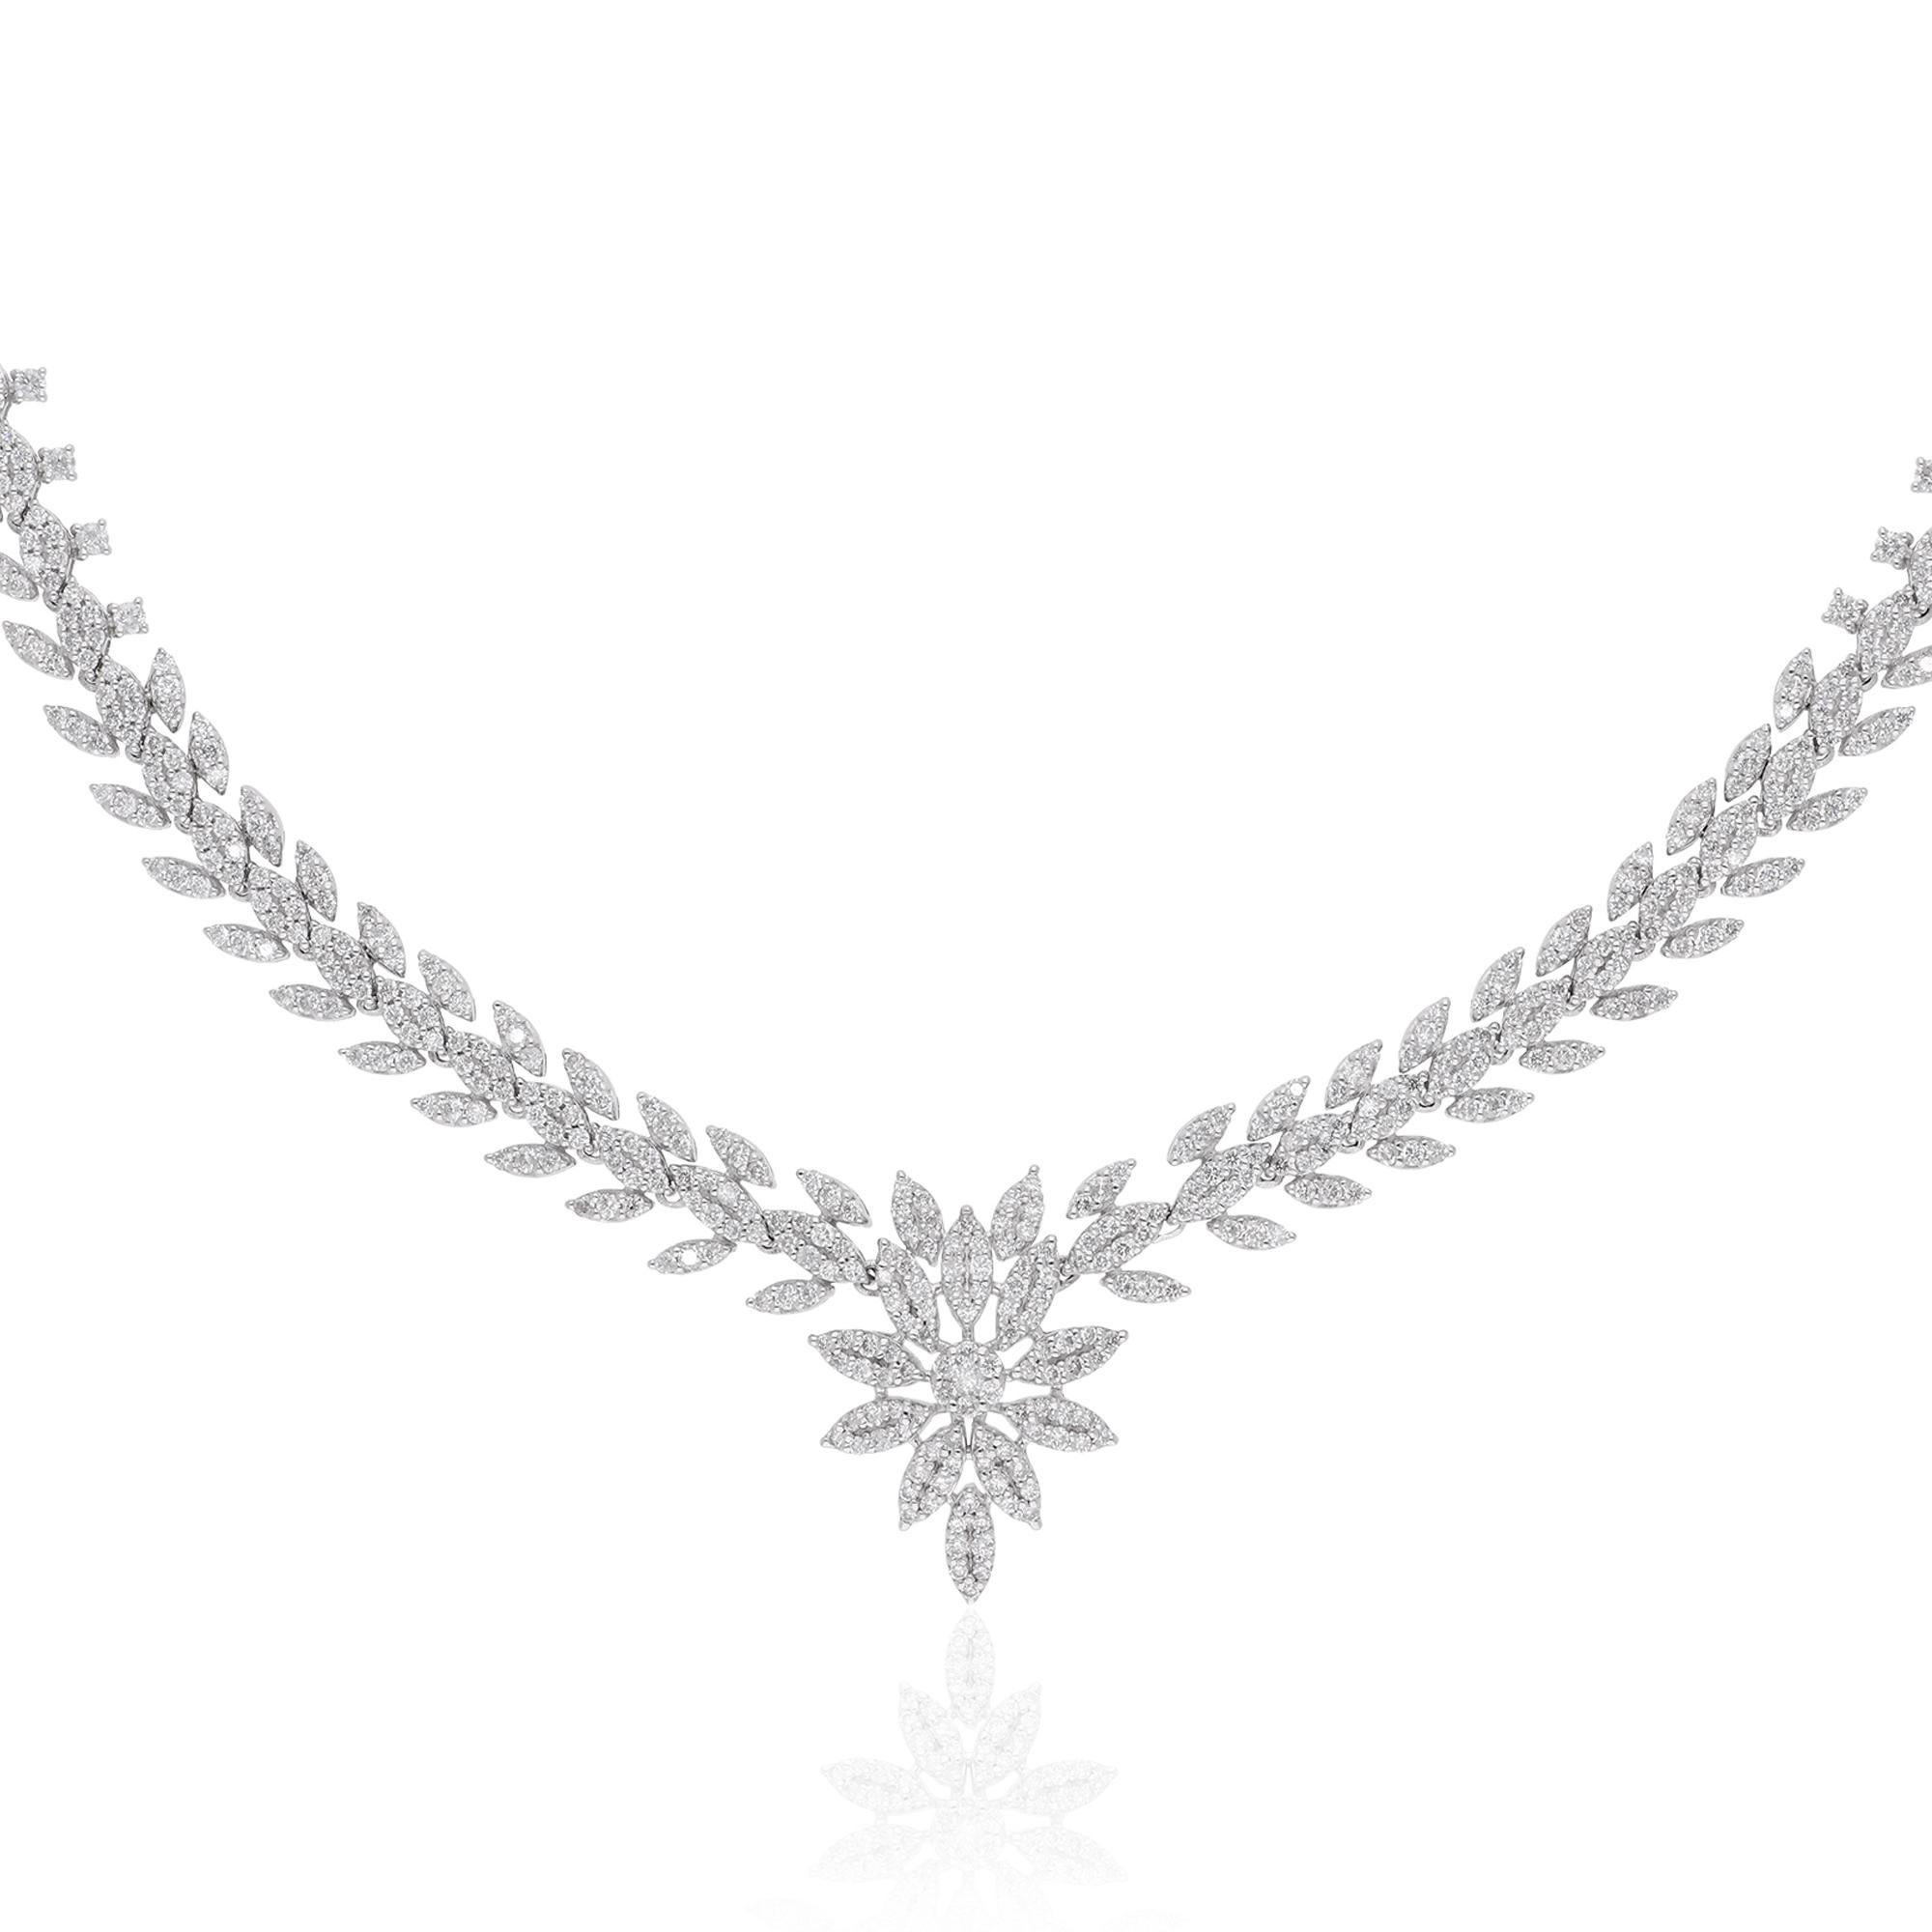 Celebrate the timeless union of love with our exquisite Natural SI/H Diamond Wedding Necklace, a radiant symbol of eternal devotion and exquisite craftsmanship. Handmade with meticulous care from 14 karat white gold, this necklace features a